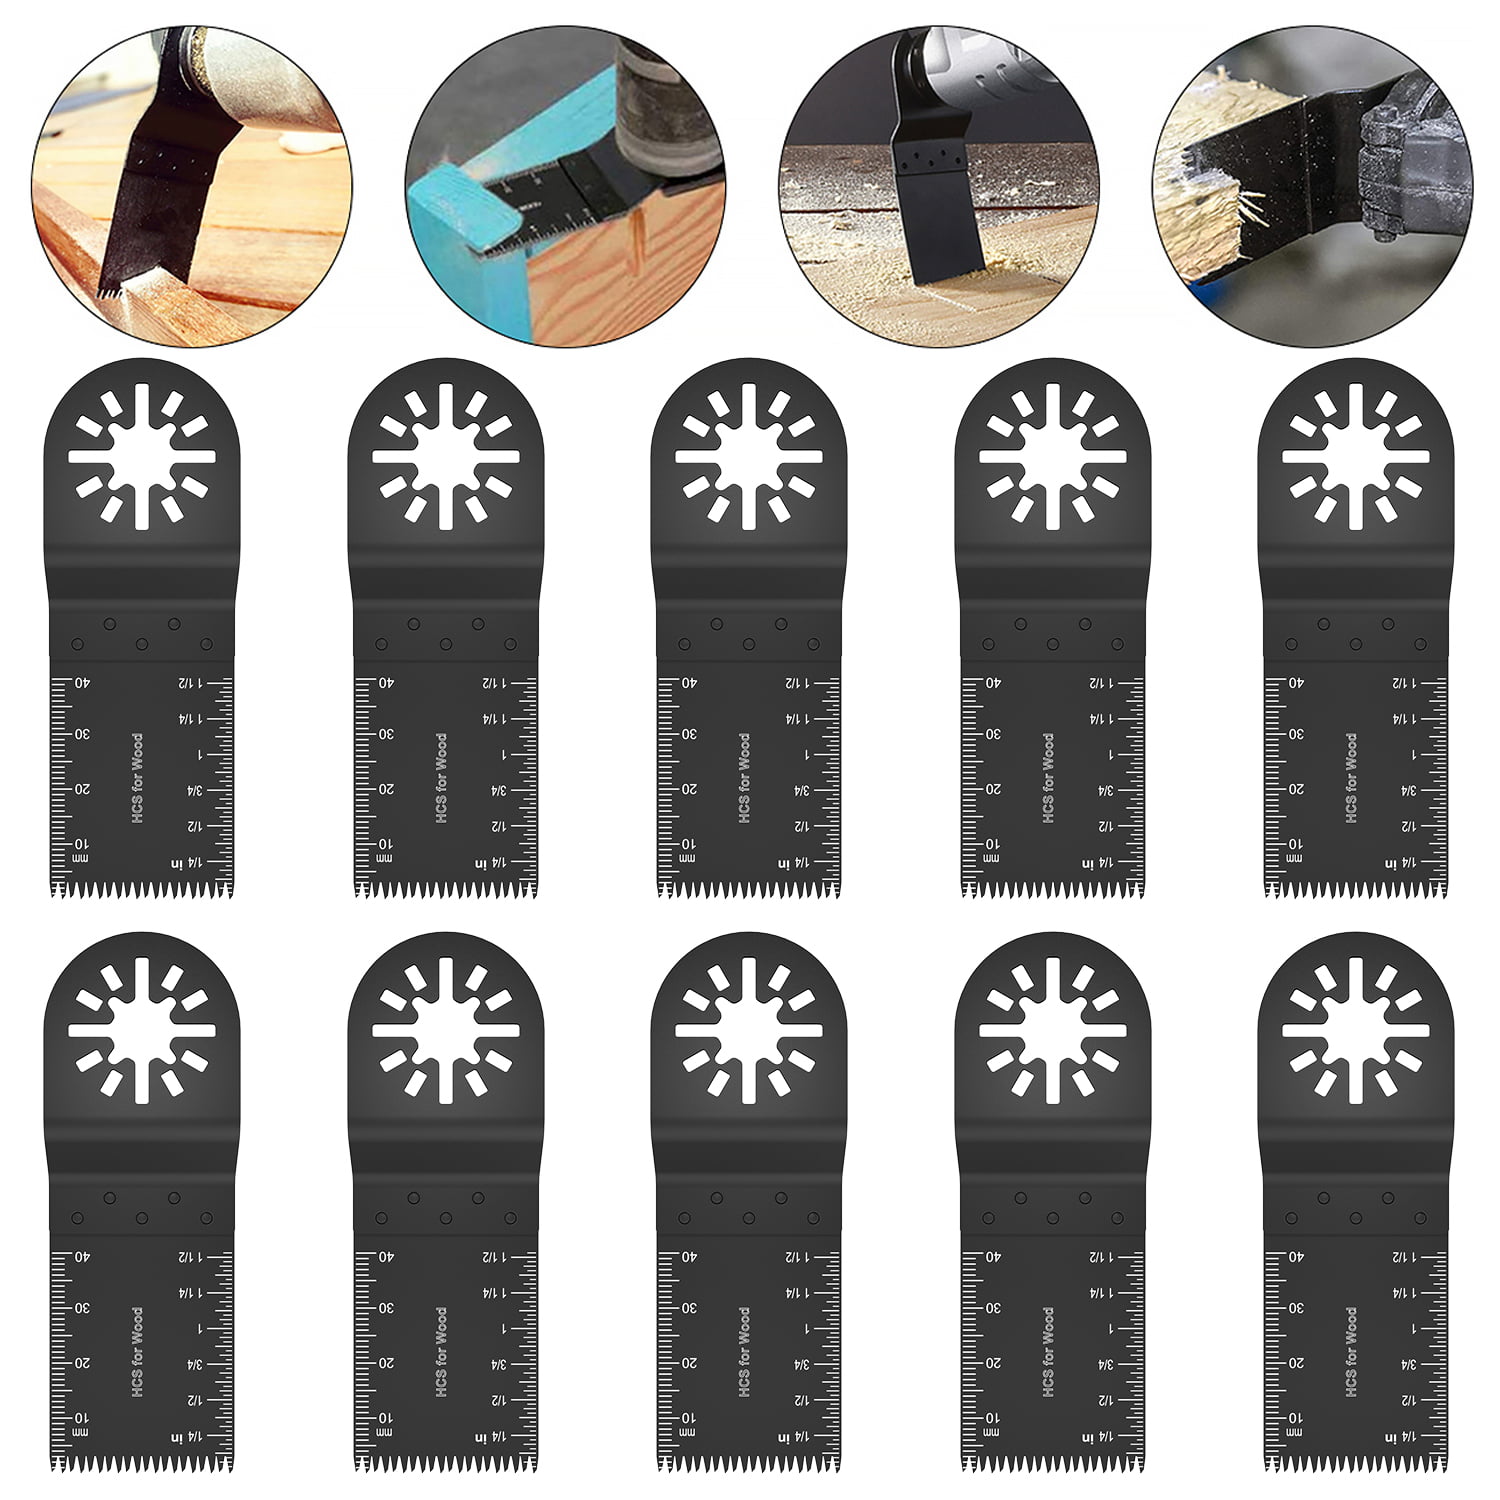 10X Wood Saw Blades carbon steel Oscillating Multitool Multi Tool Quick Release 